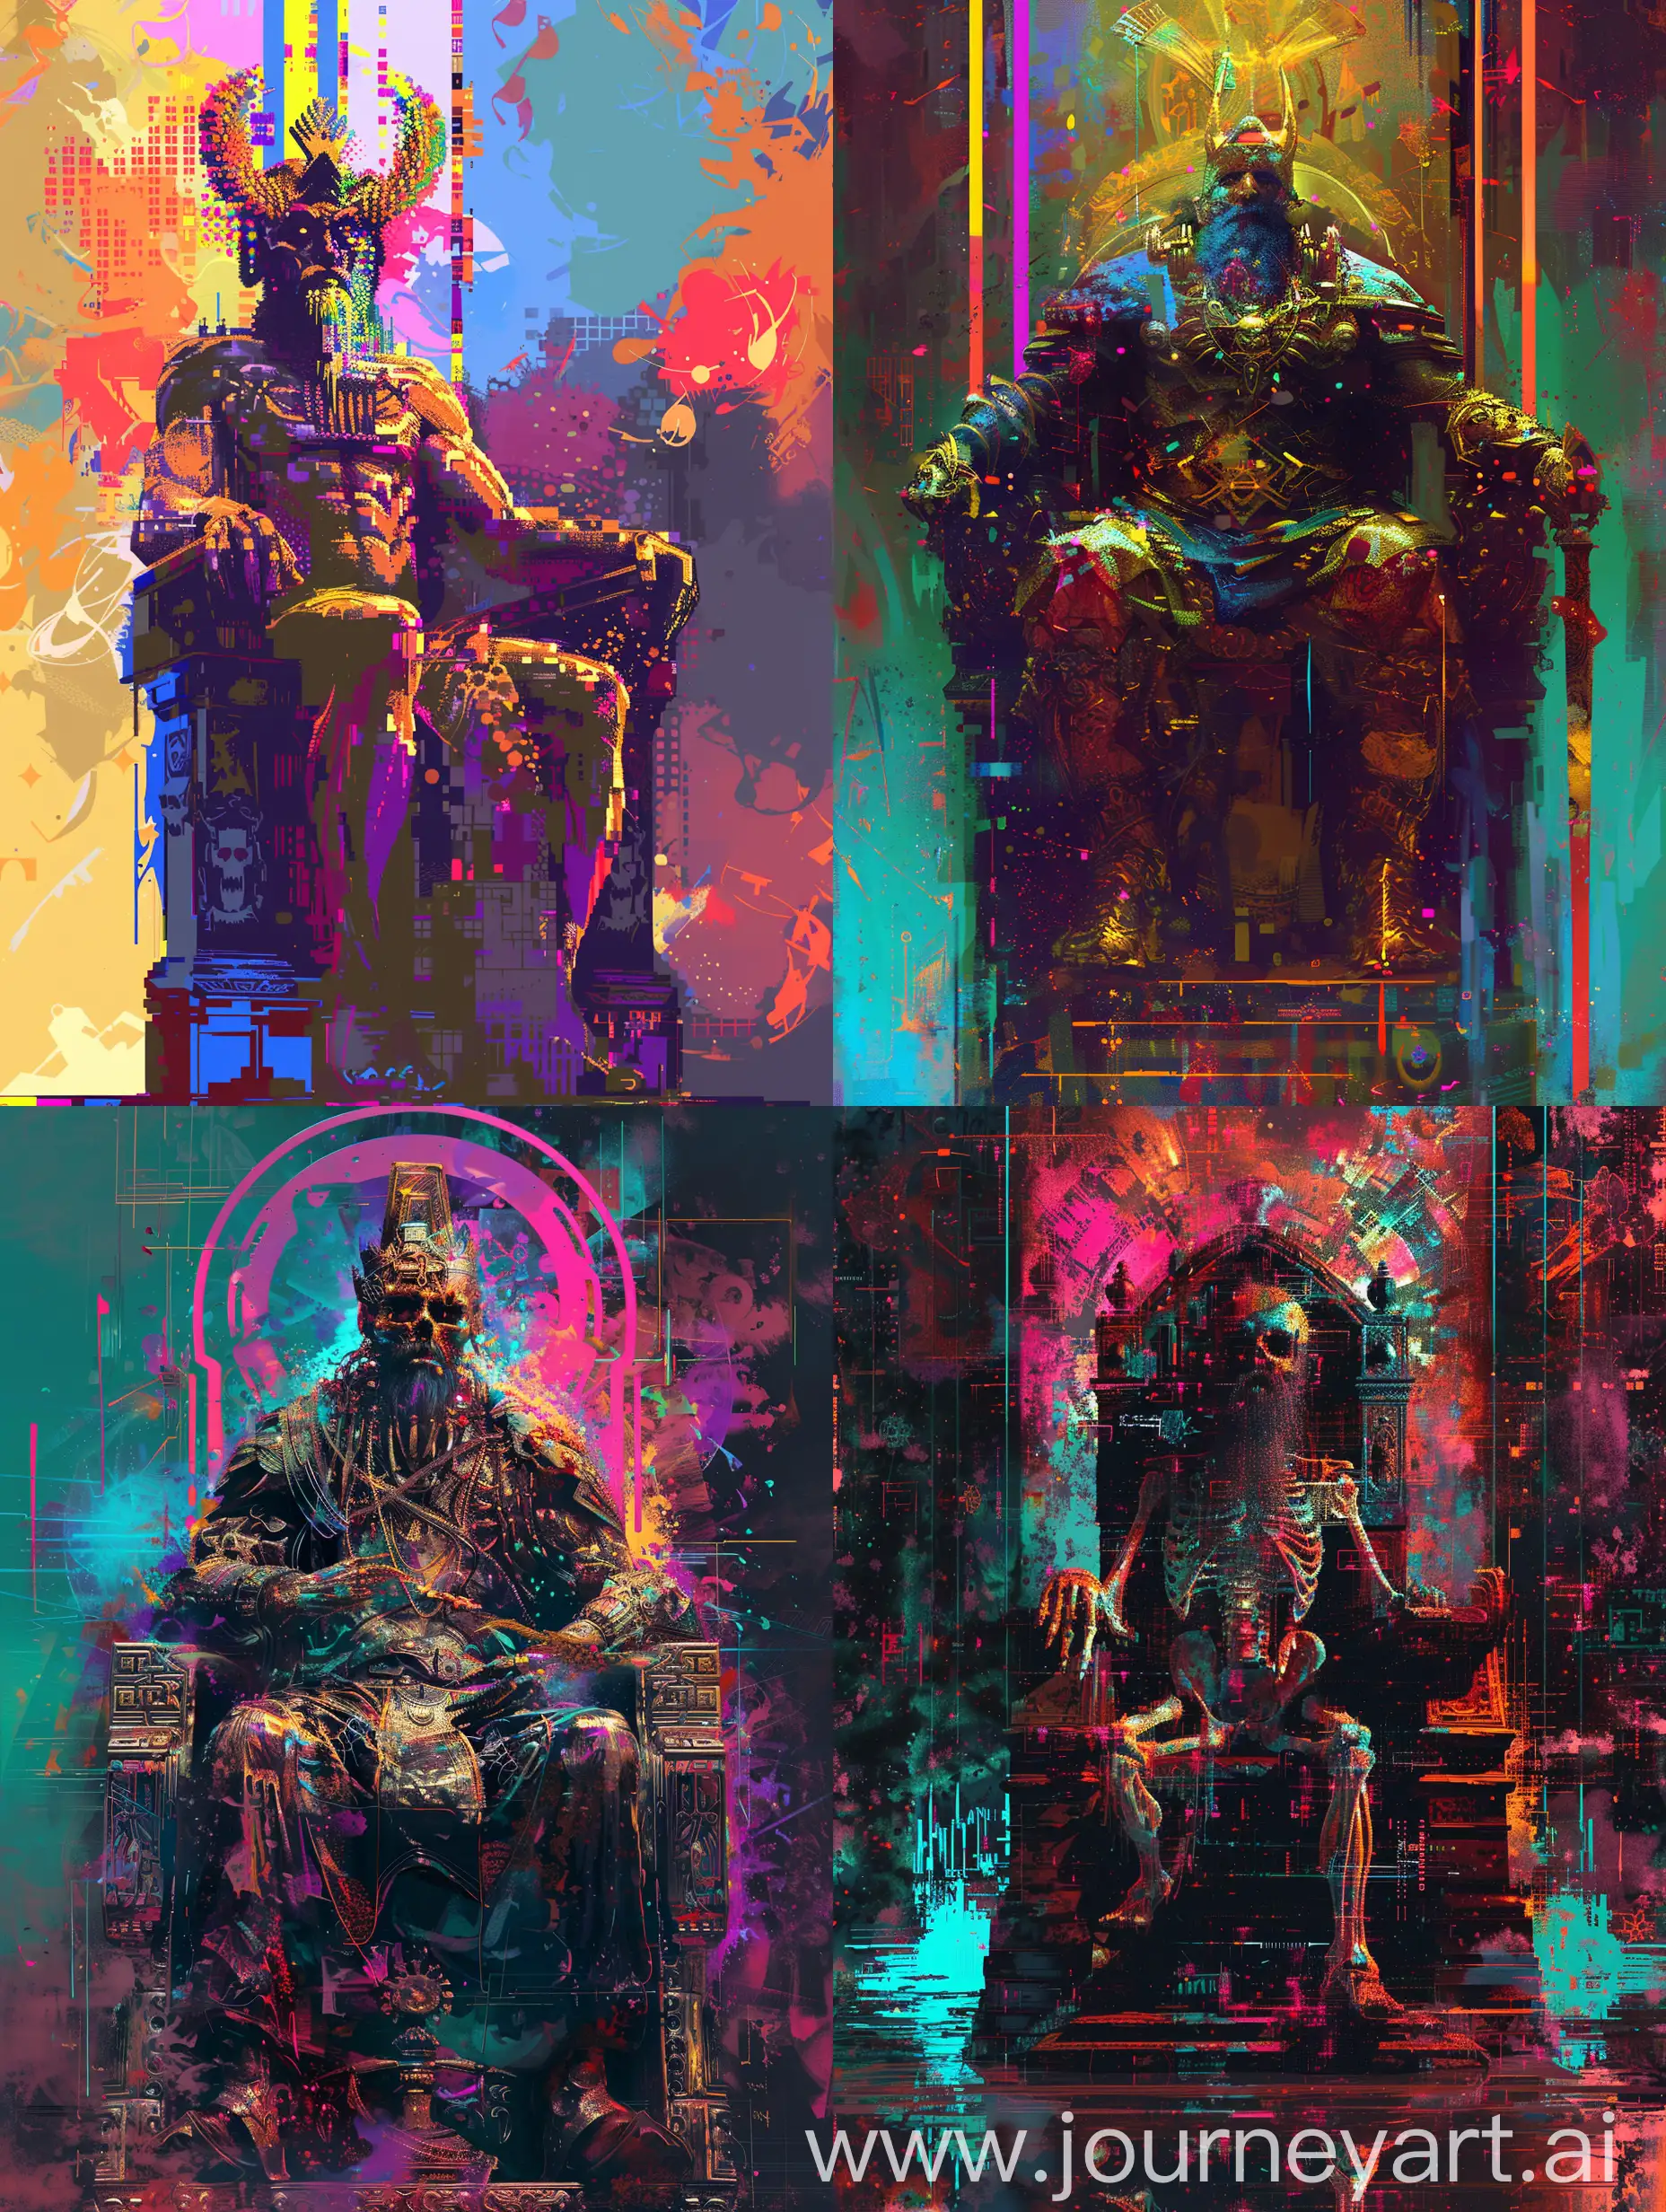 Subject: The image features a colorful abstract anomaly, showcasing vibrant.
The pixels showcase and imply this is an ancient and powerful immortal being.
An ancient and old immortal king of the cosmos, older than the gods and their father, ruler of time itself, no other god has that domain.Tall, weathered bronze skin, golden eyes, muscle yet sickly thin, black hair and beard all unruly and unkempt.


Style/background/color/etc: a bit of dark fantasy, a tyrant. The illustration adopts a dark fantasy art style, characterized by rich, deep tones that enhance the mysterious atmosphere.
The style is a blend of synthwave and surrealism, with vibrant and nostalgic colors dominating t palette.
The artist skillfully incorporates visual elements inspired by renowned artists like Syd Mead and Hiroshi Nagaim, resulting in a unique and eye-catching composition. 


Action: he sits on an old throne that symbolize his exaggerated feel of importance as king. He has his ancient scythe weapon.


full body --c 22--s 750 --v 6.0-ar 5:7 -v 6 - ar 3:4-по 47237
